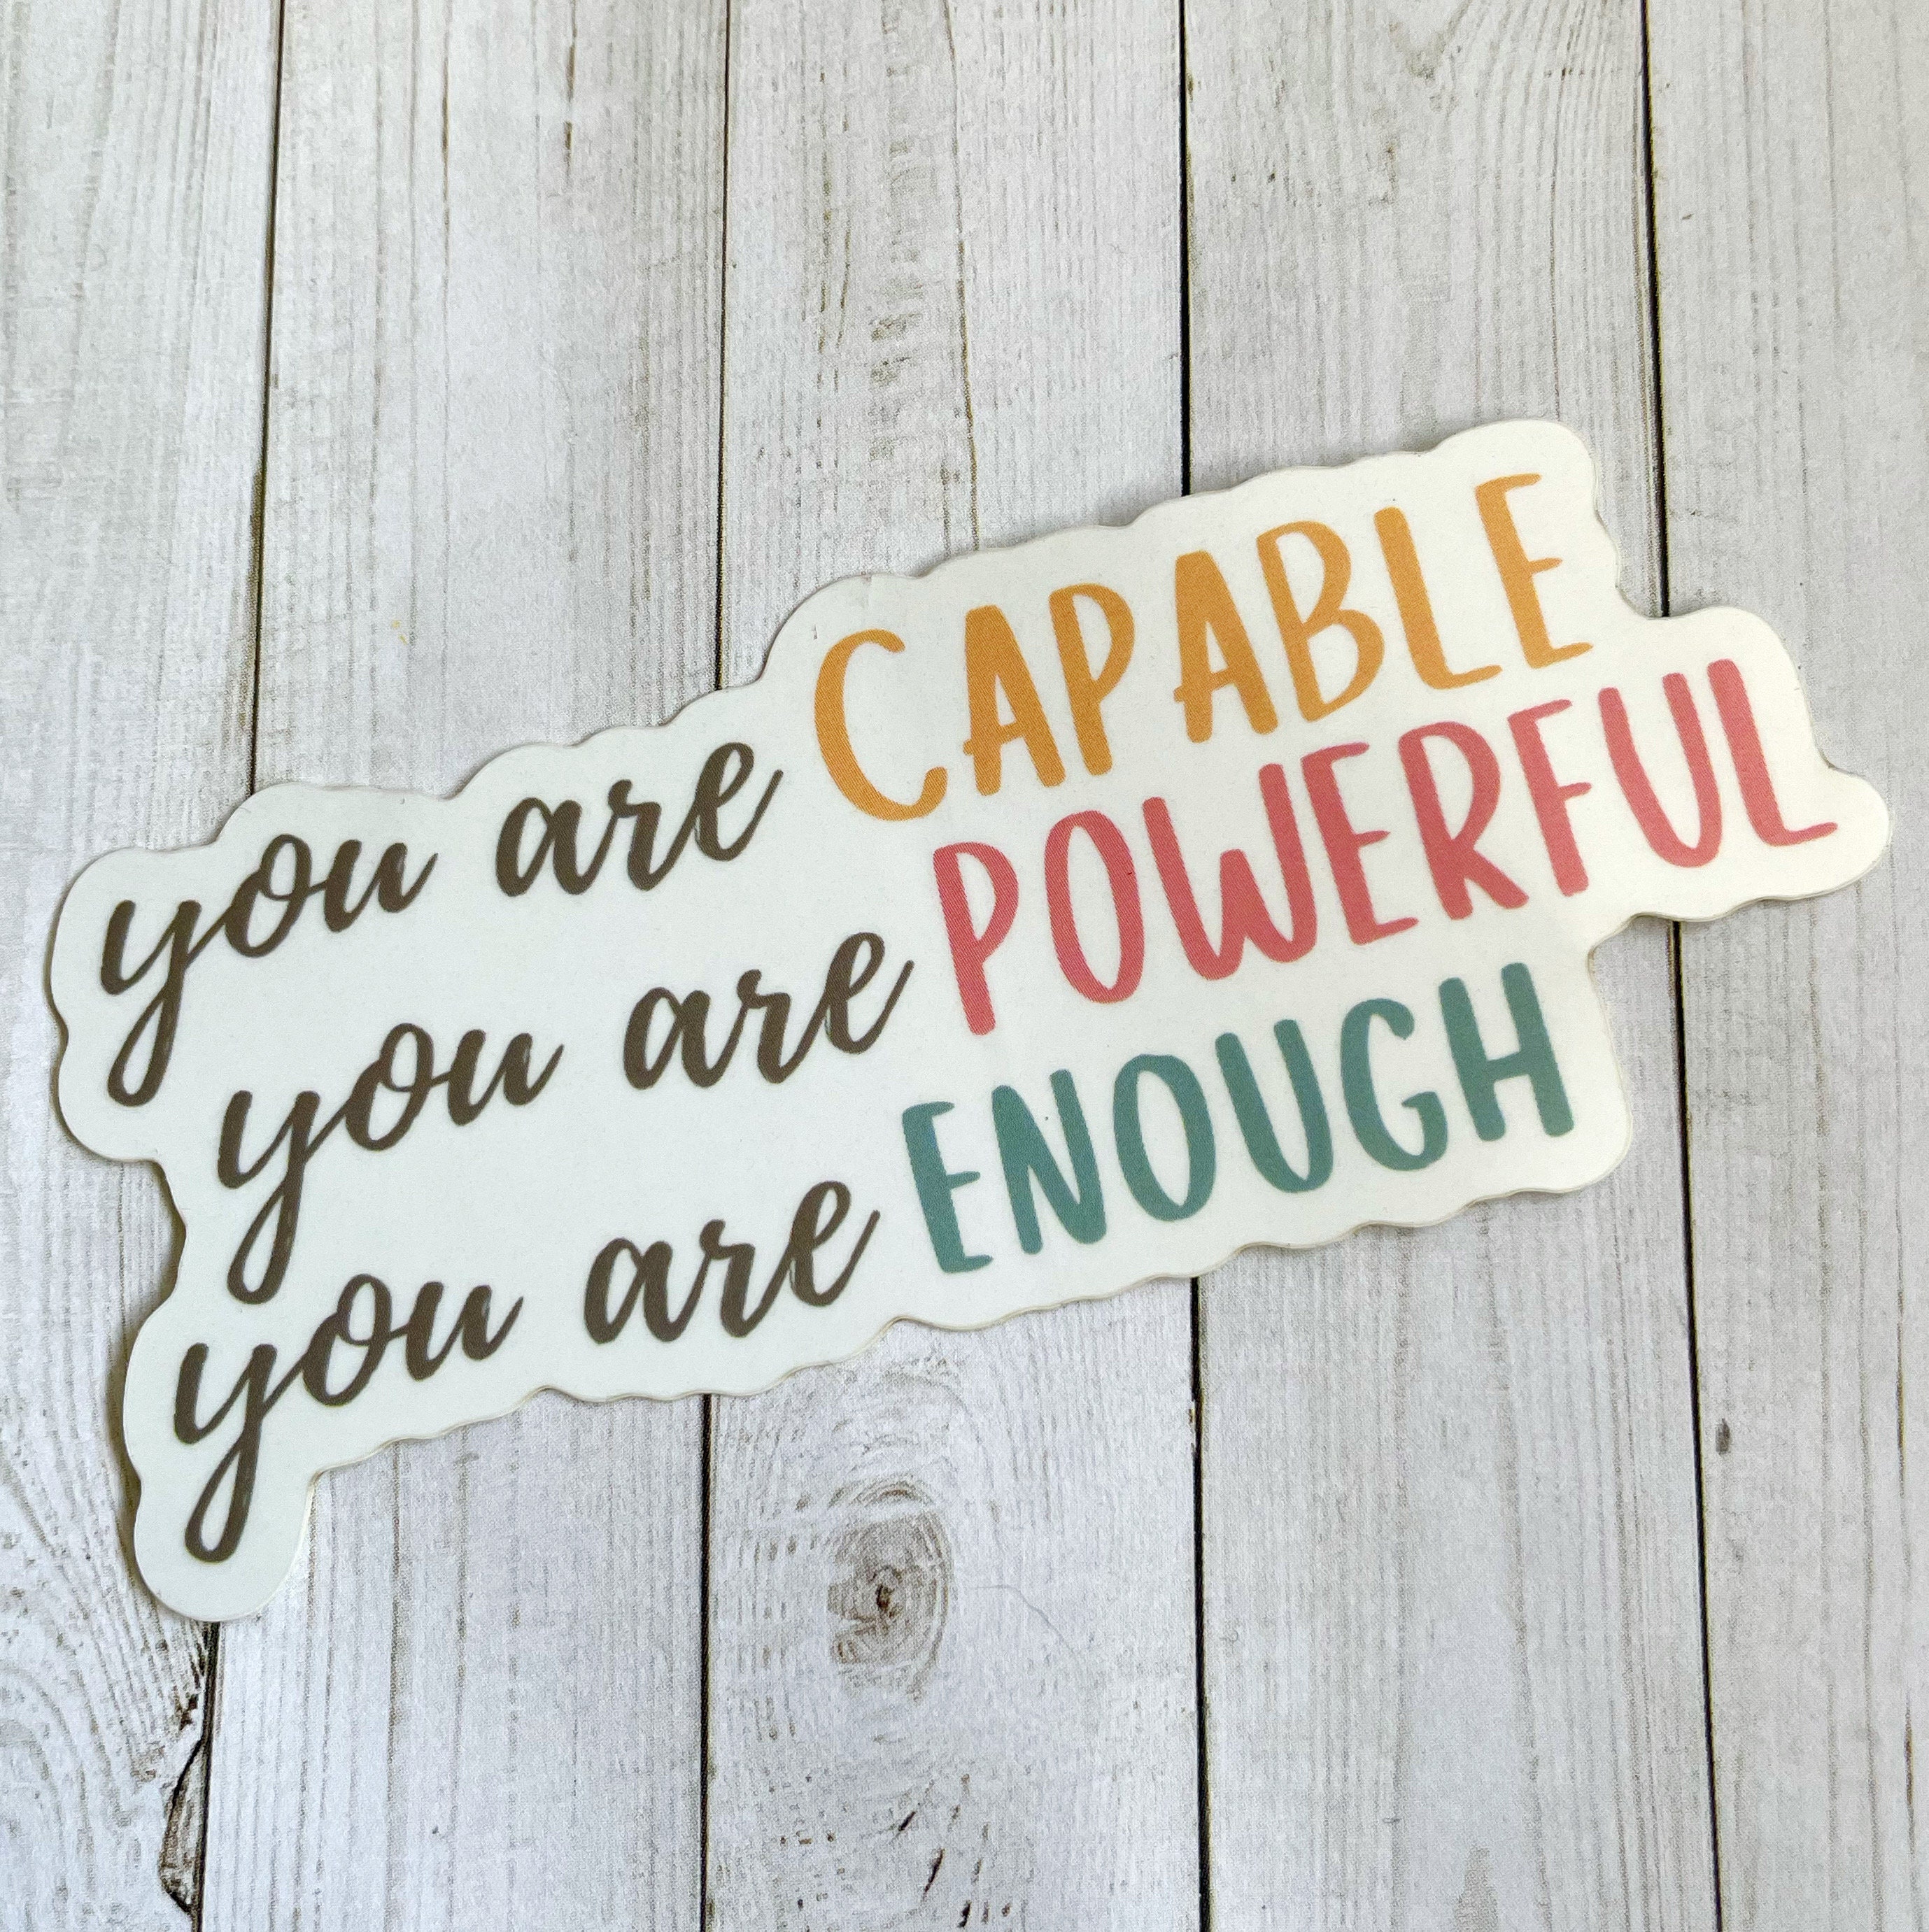 You are Capable Powerful Enough Affirmation Vinyl STICKER | Etsy